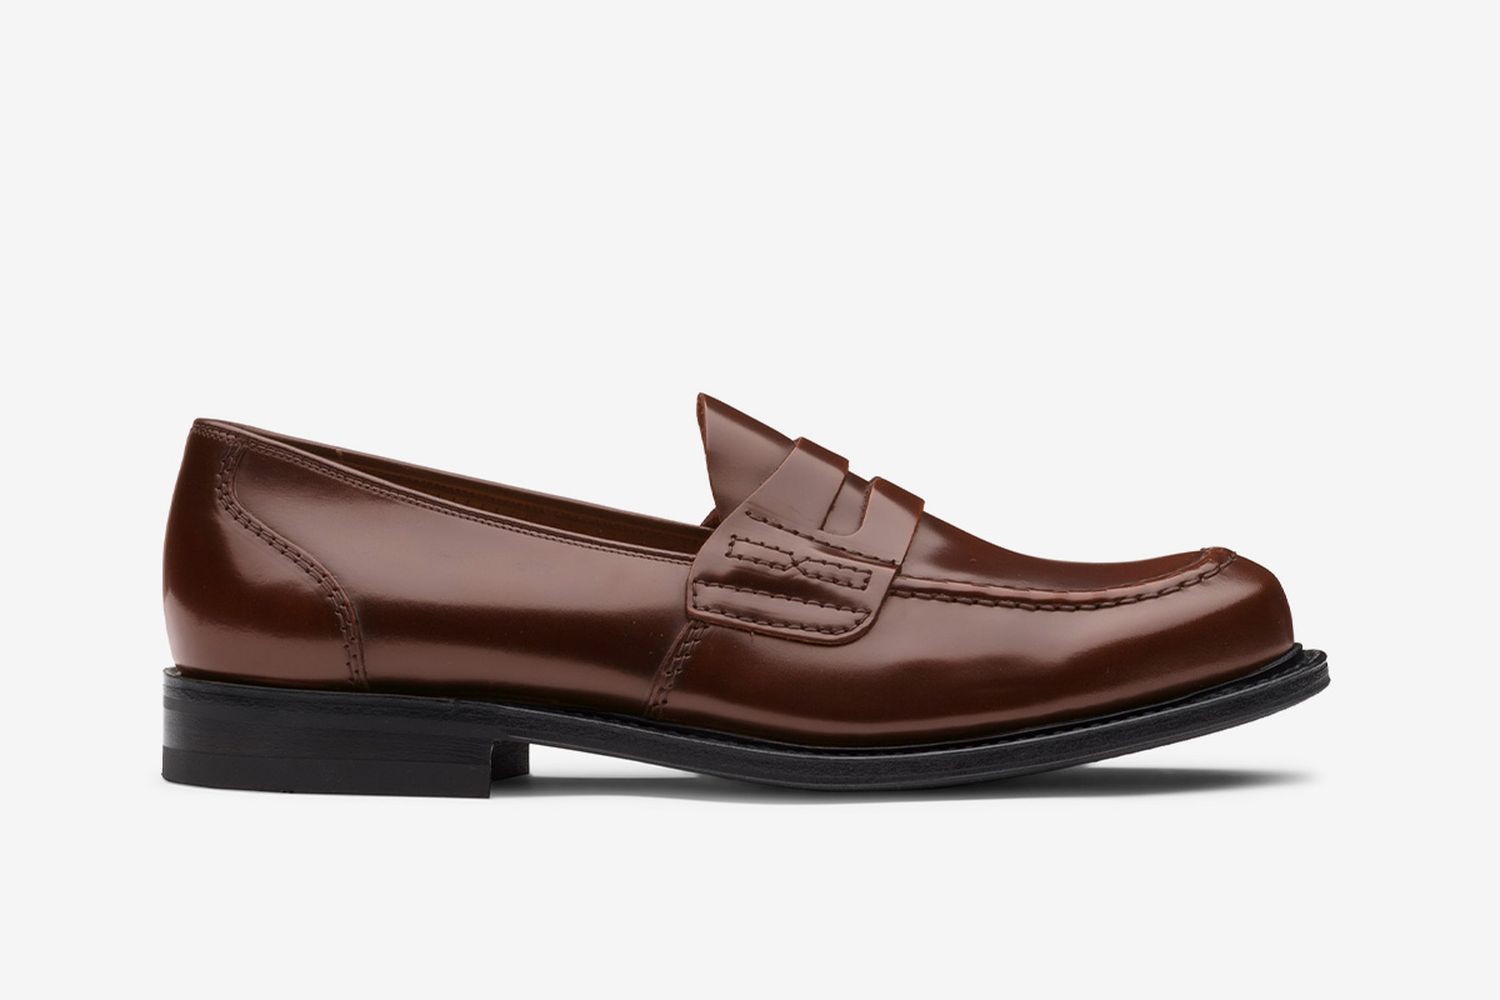 10 of the Best Loafers to Buy 2021